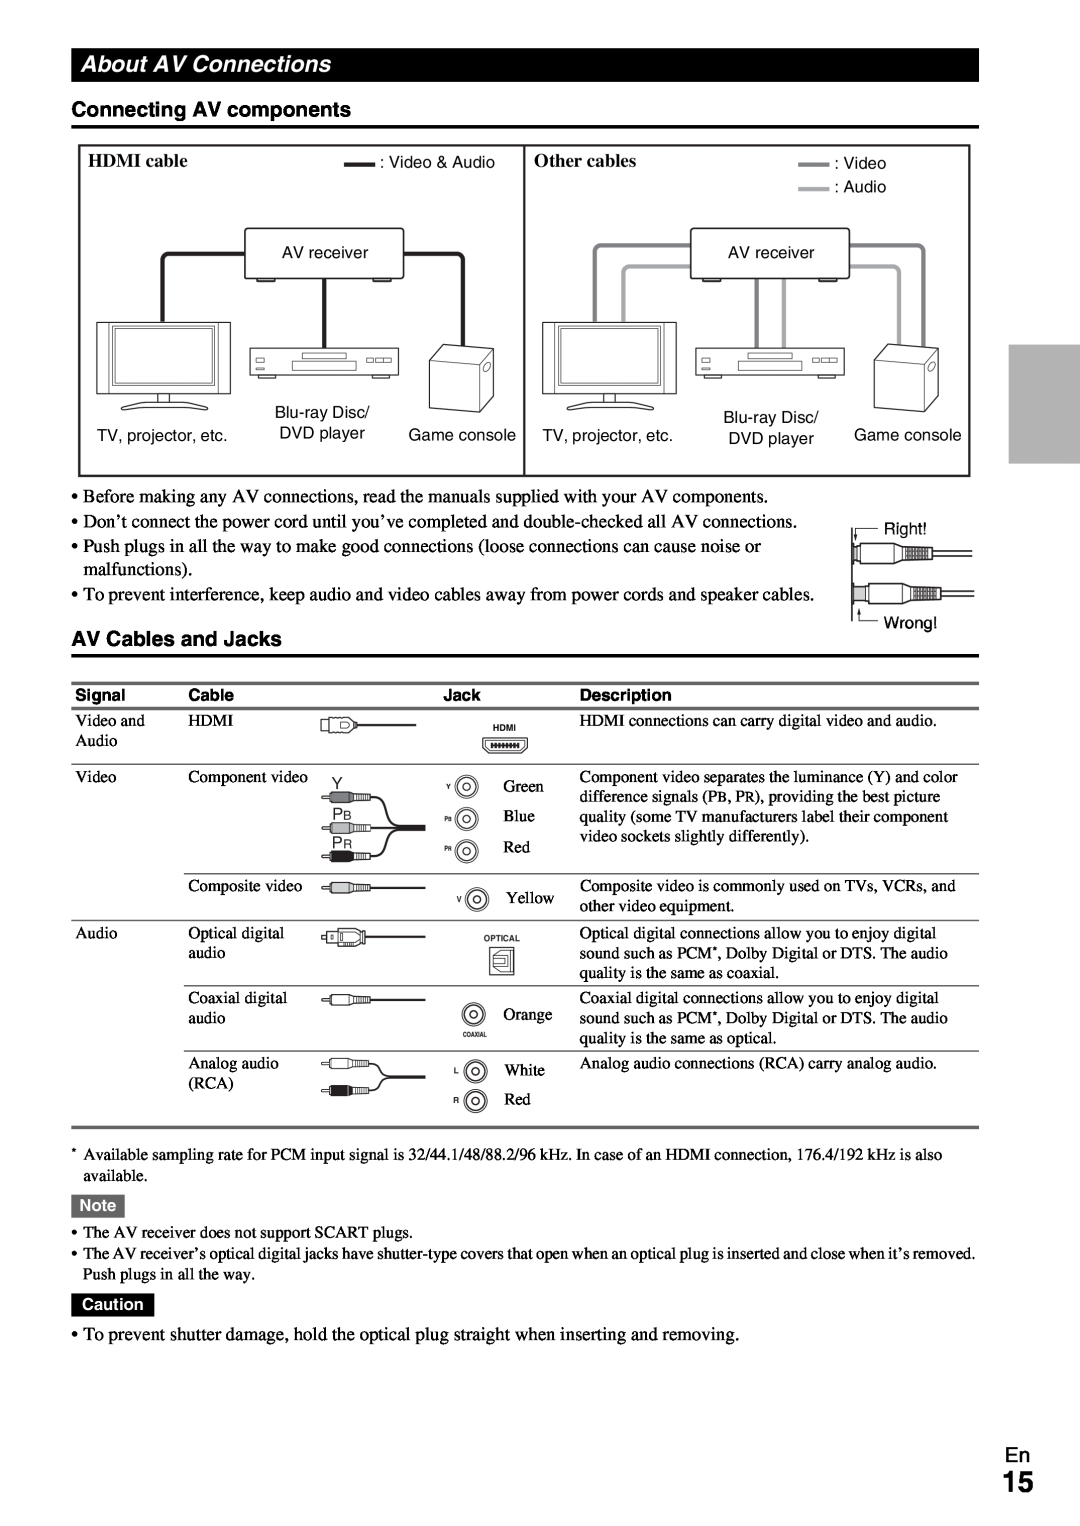 Onkyo HT-RC360 instruction manual About AV Connections, Connecting AV components, AV Cables and Jacks 